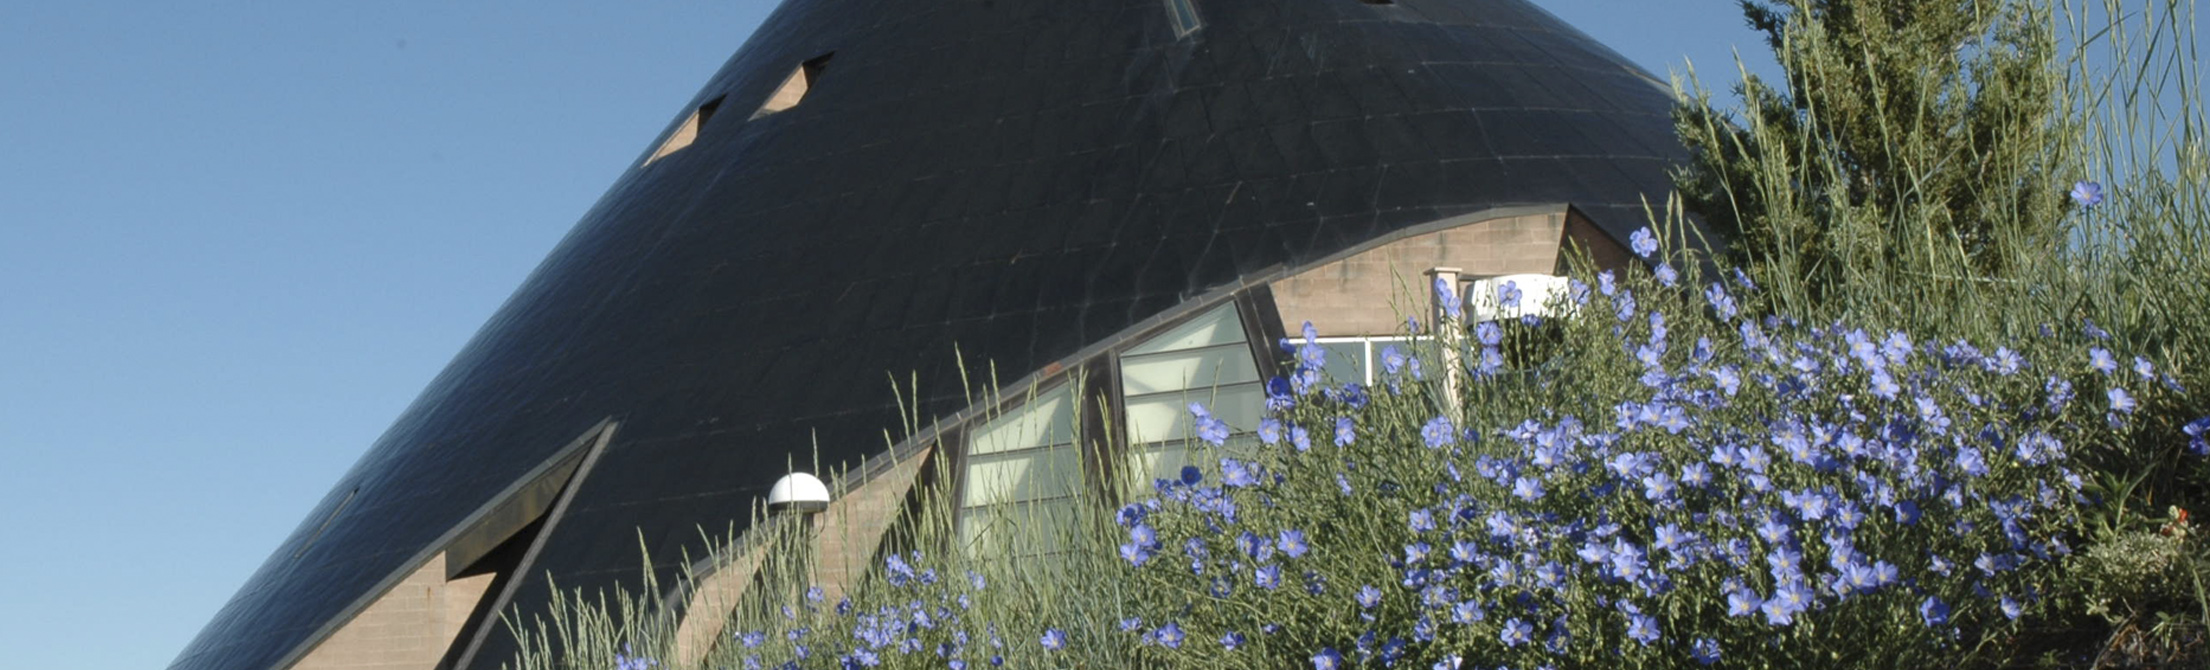 American Heritage Center cone building in background, blue flax in foreground